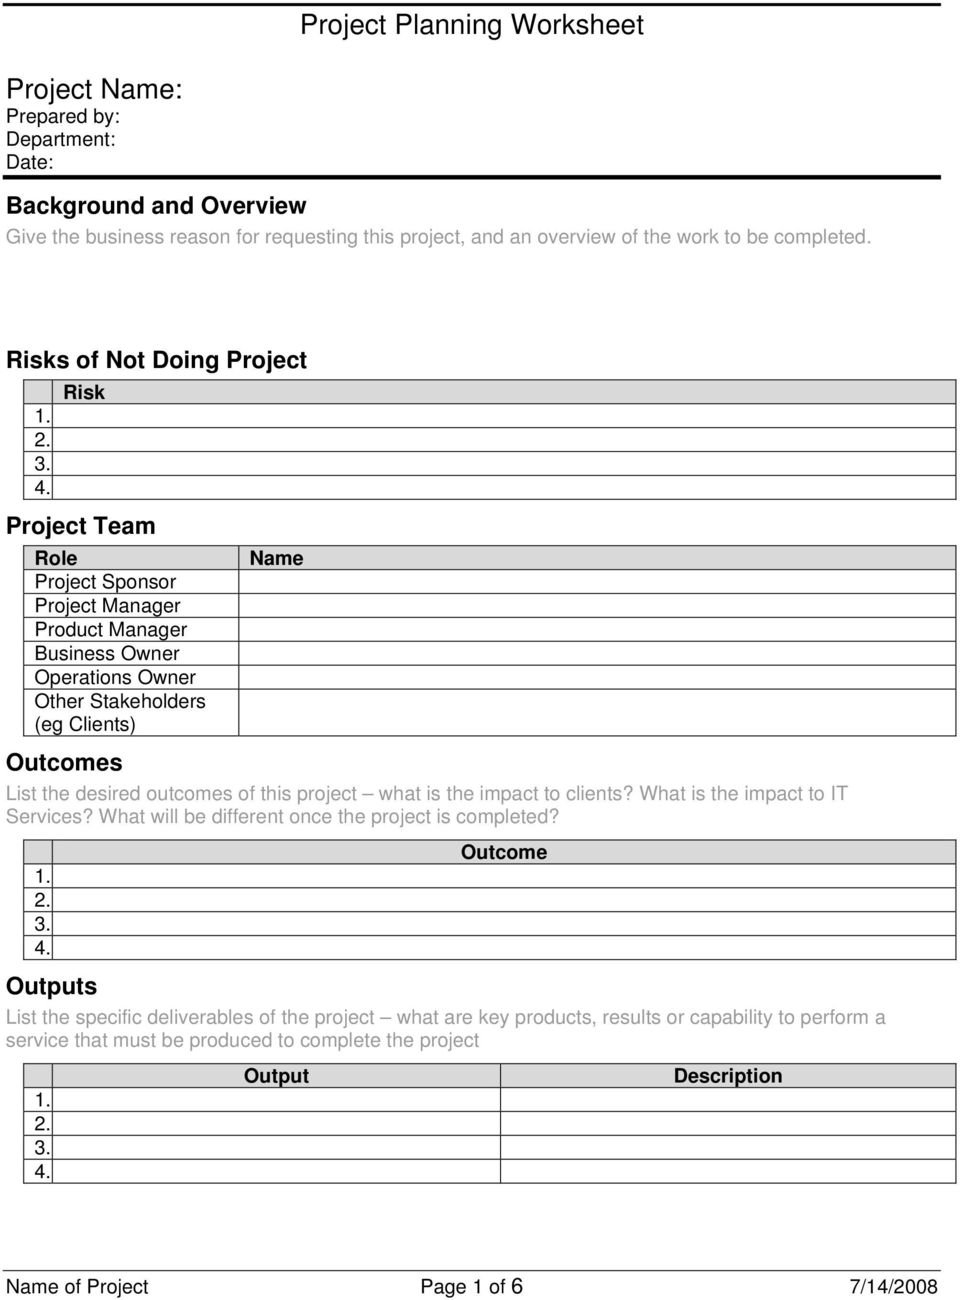 Project Planning Worksheet  Pdf Throughout Project Planning Worksheet